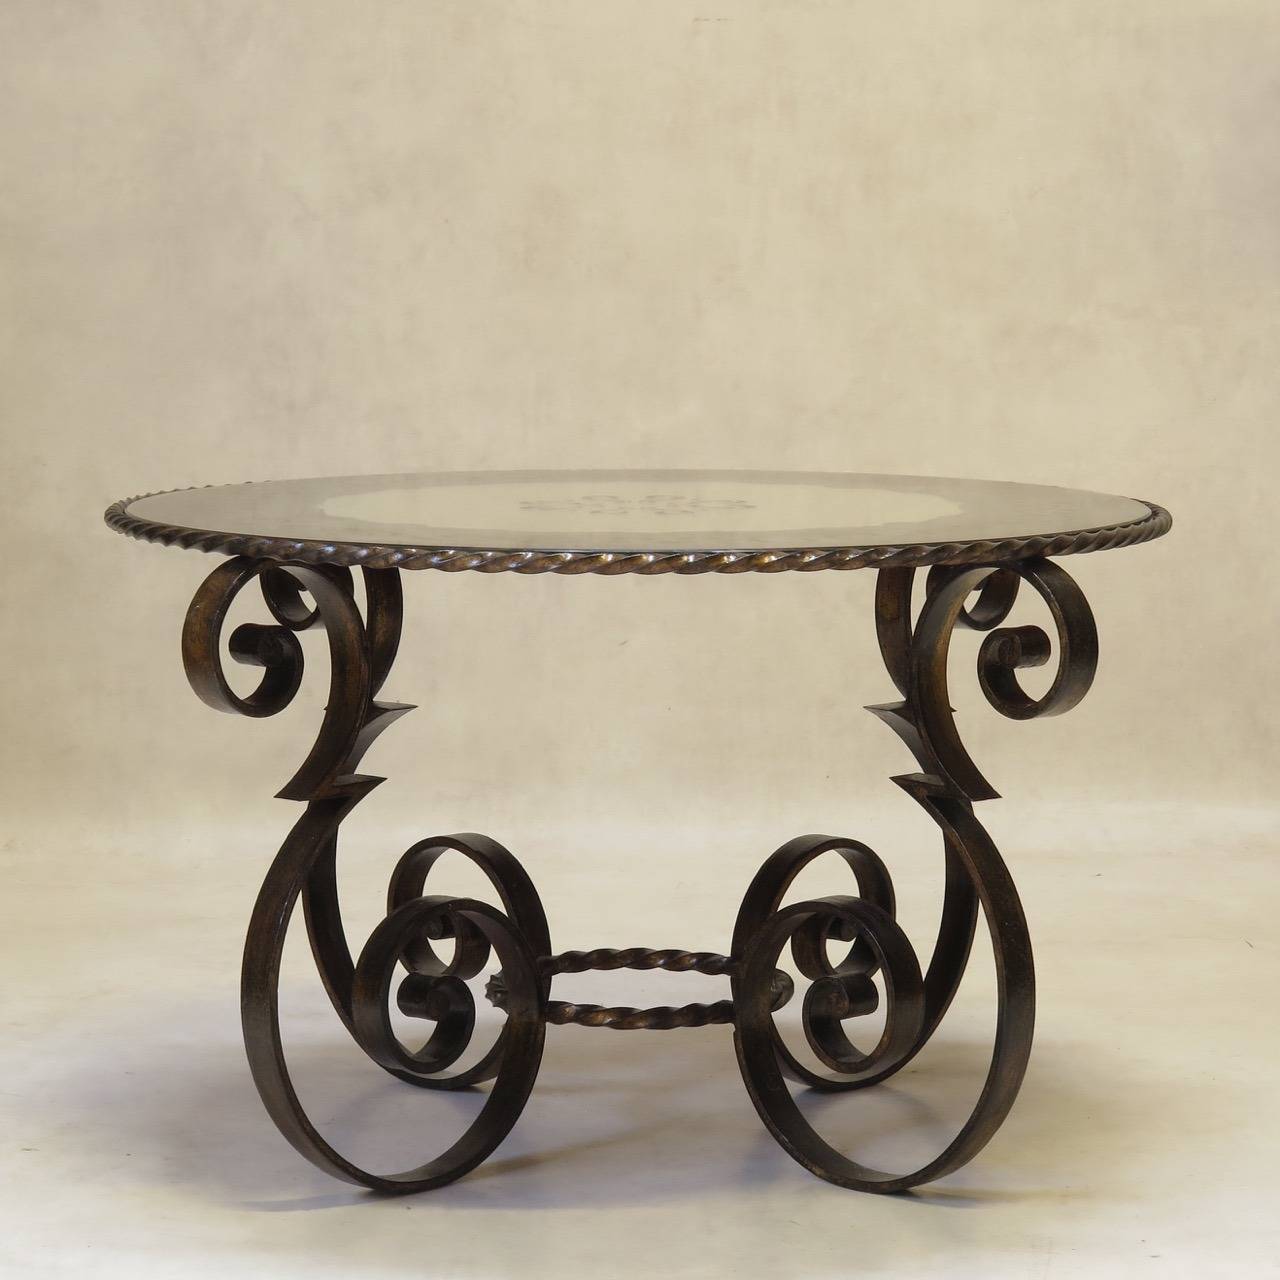 Delightful and chic round coffee table with a heavily scrolled wrought iron base with zig-zag detail and twisted gilt iron stretcher and table top surround. Gilded base. Eglomisé mirrored table top.